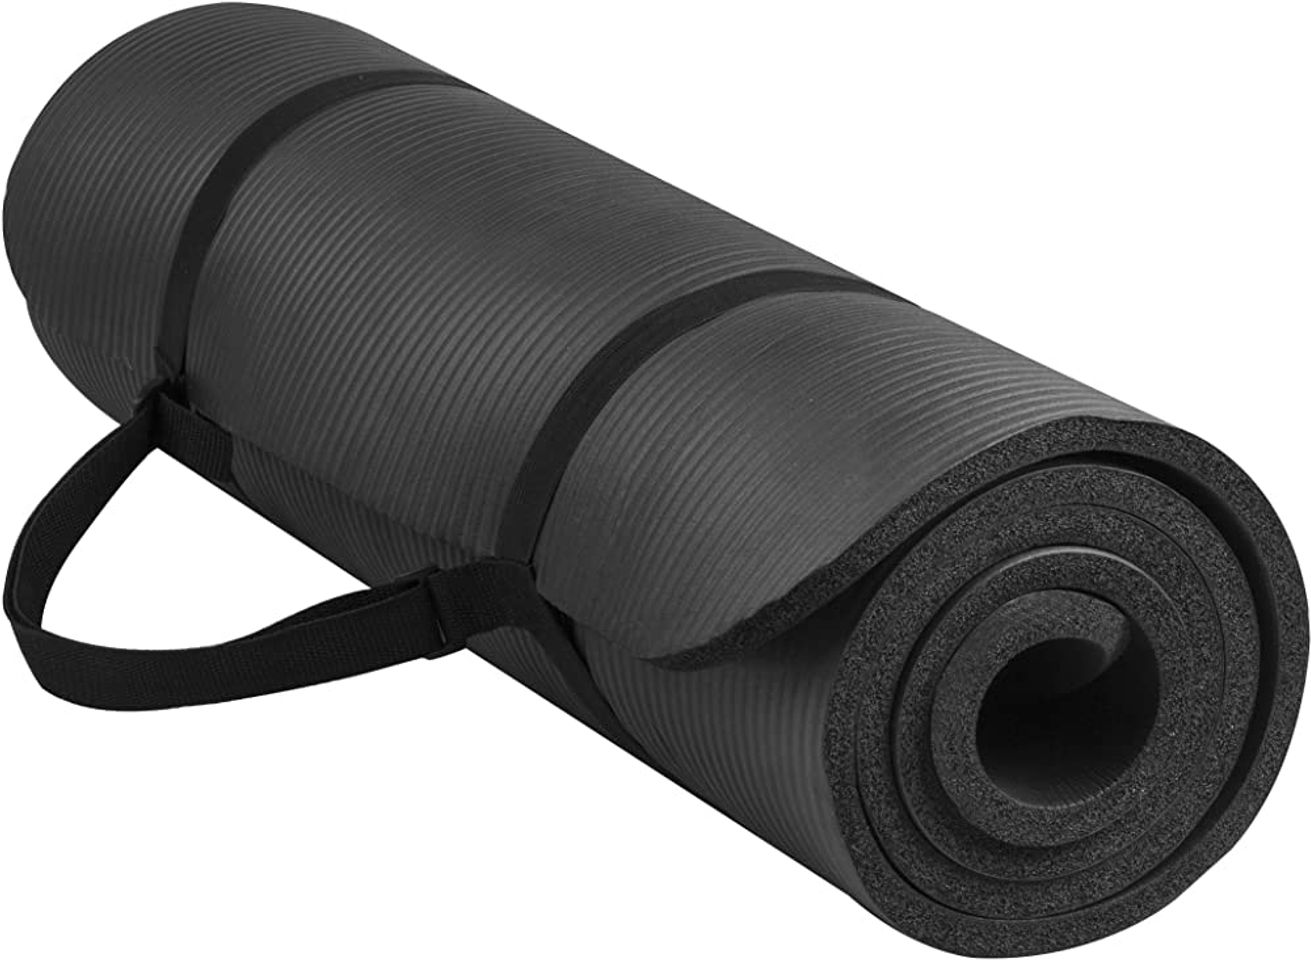 Best Extra Thick Yoga Mats